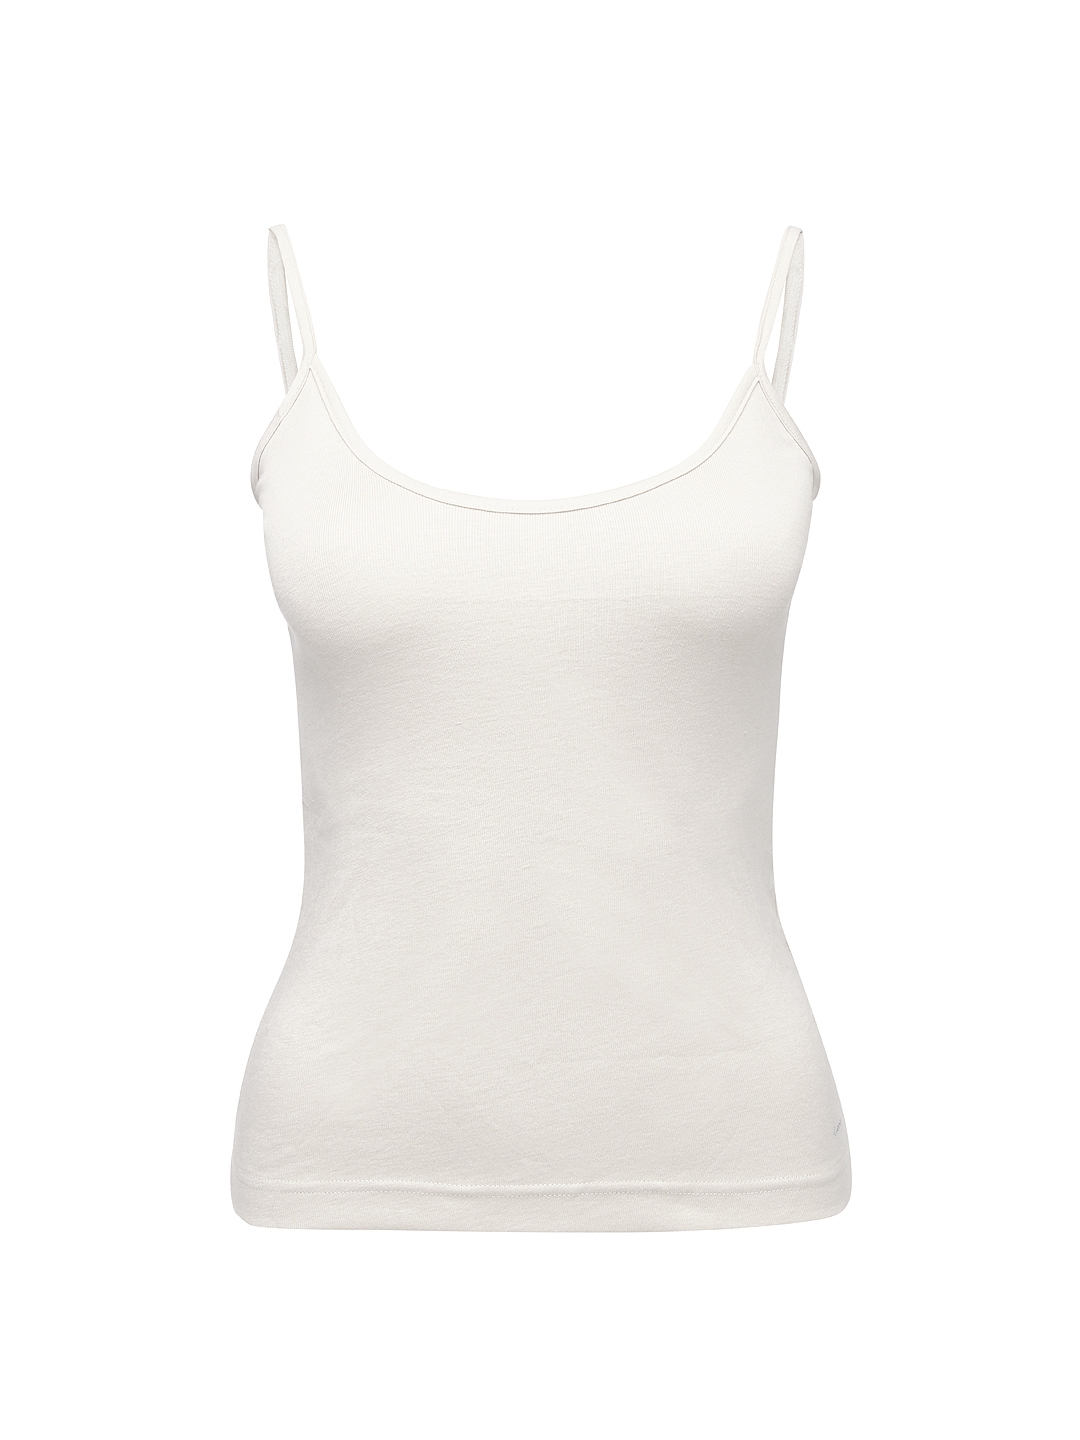 Buy Jockey Simple Comfort White Spaghetti Top 1487 - Camisoles for ...